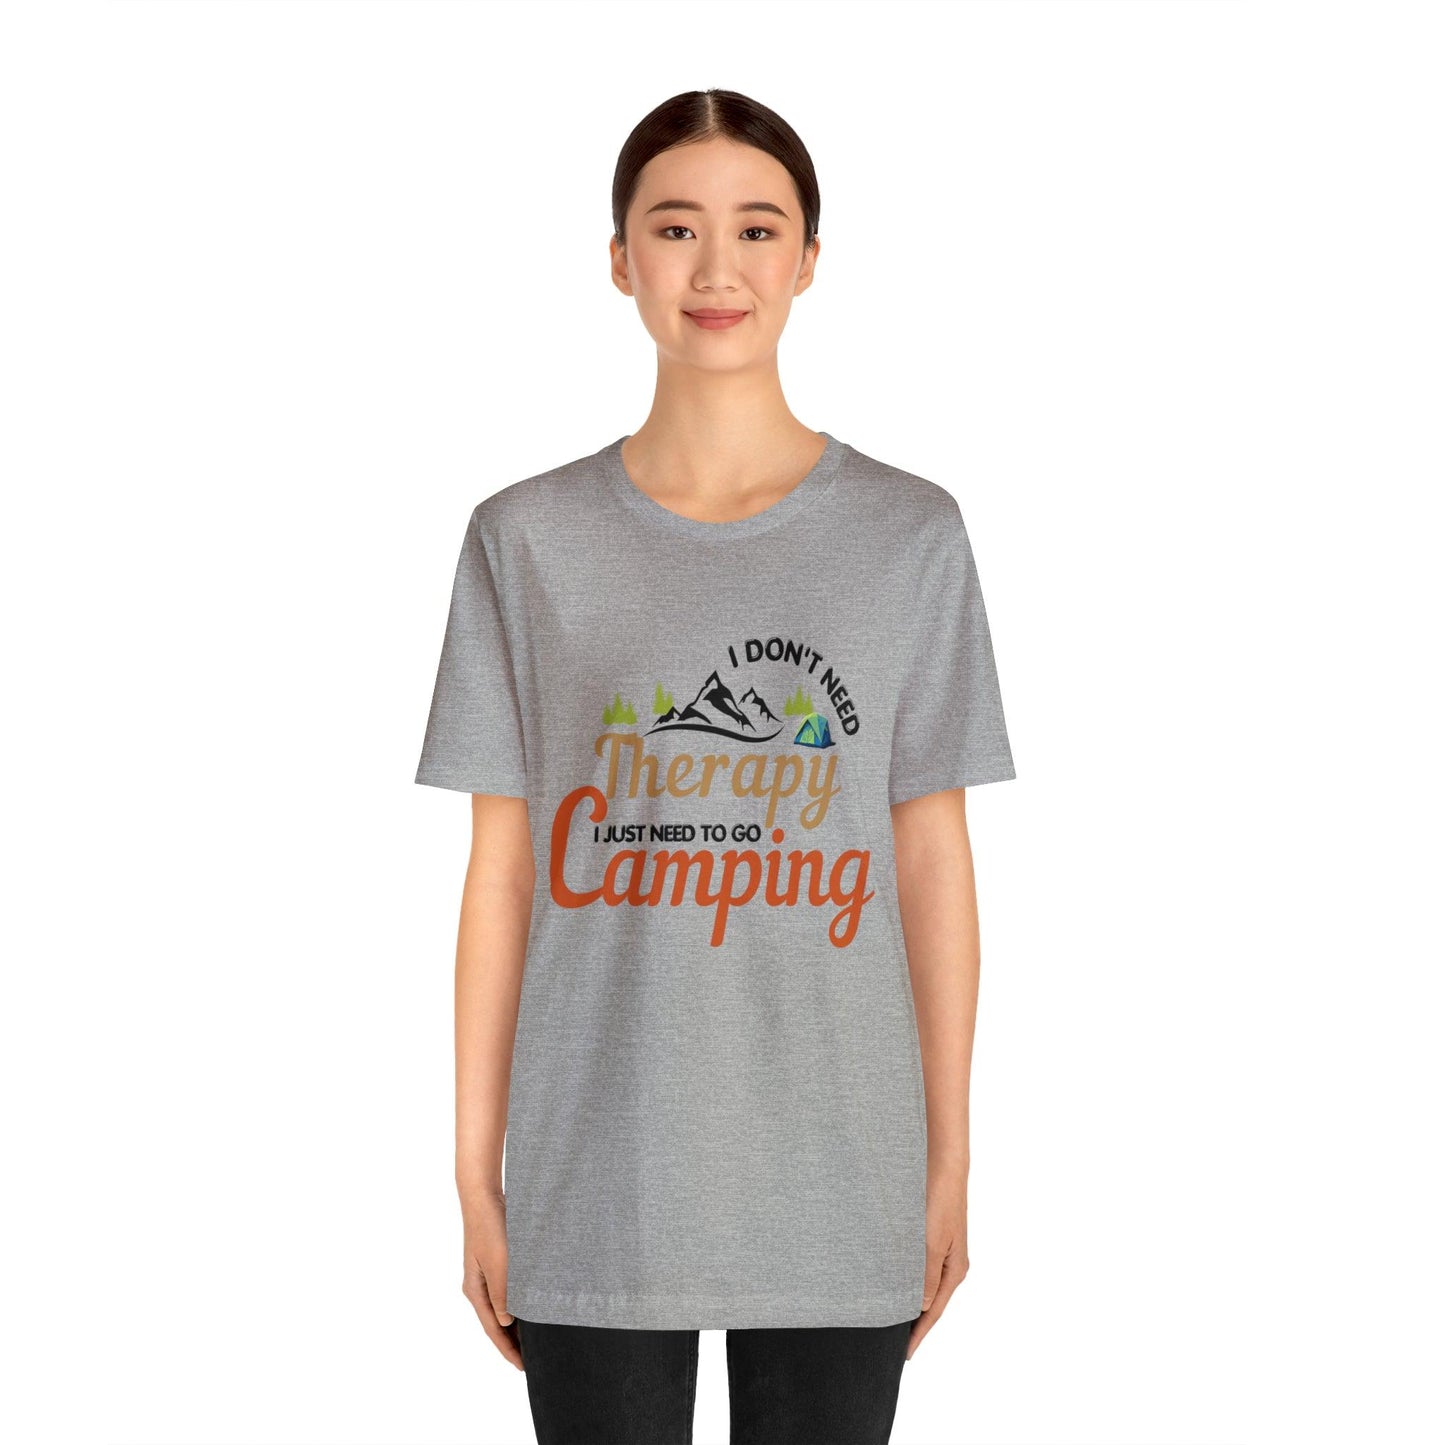 I don't need therapy I just need to go camping, camping shirt, dad shirt, dad gift, gift for outdoor lover, fishing gift nature lover shirt